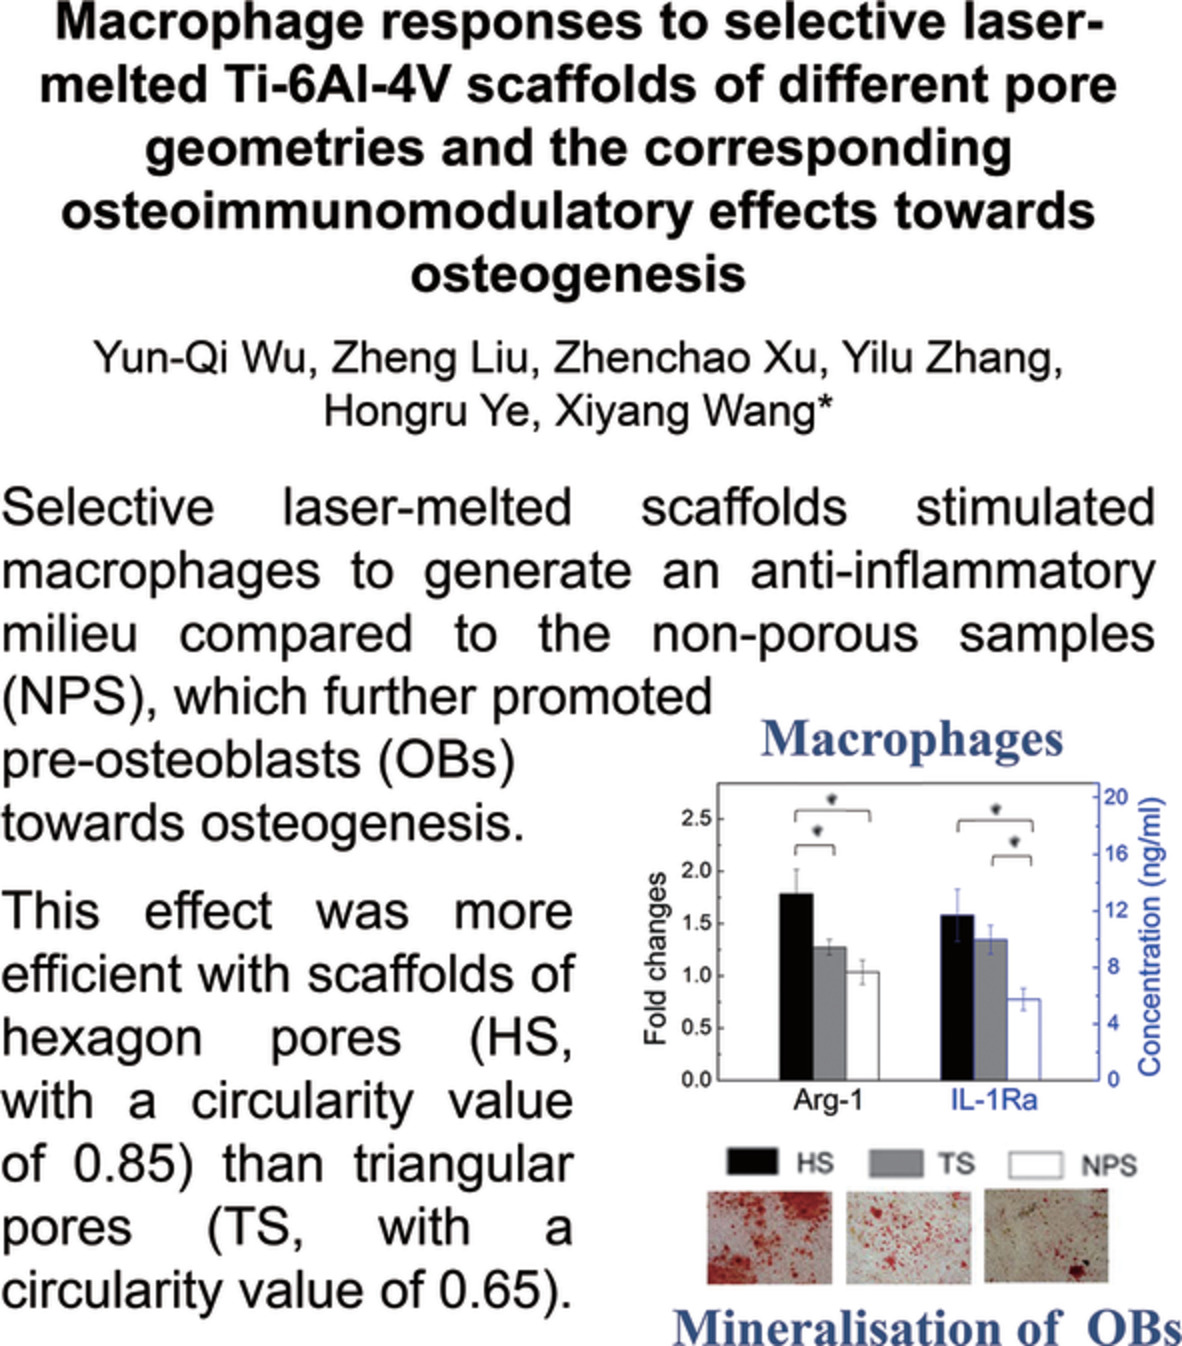 Macrophage responses to selective laser‐melted Ti‐6Al‐4V scaffolds of different pore geometries and the corresponding osteoimmunomodulatory effects toward osteogenesis